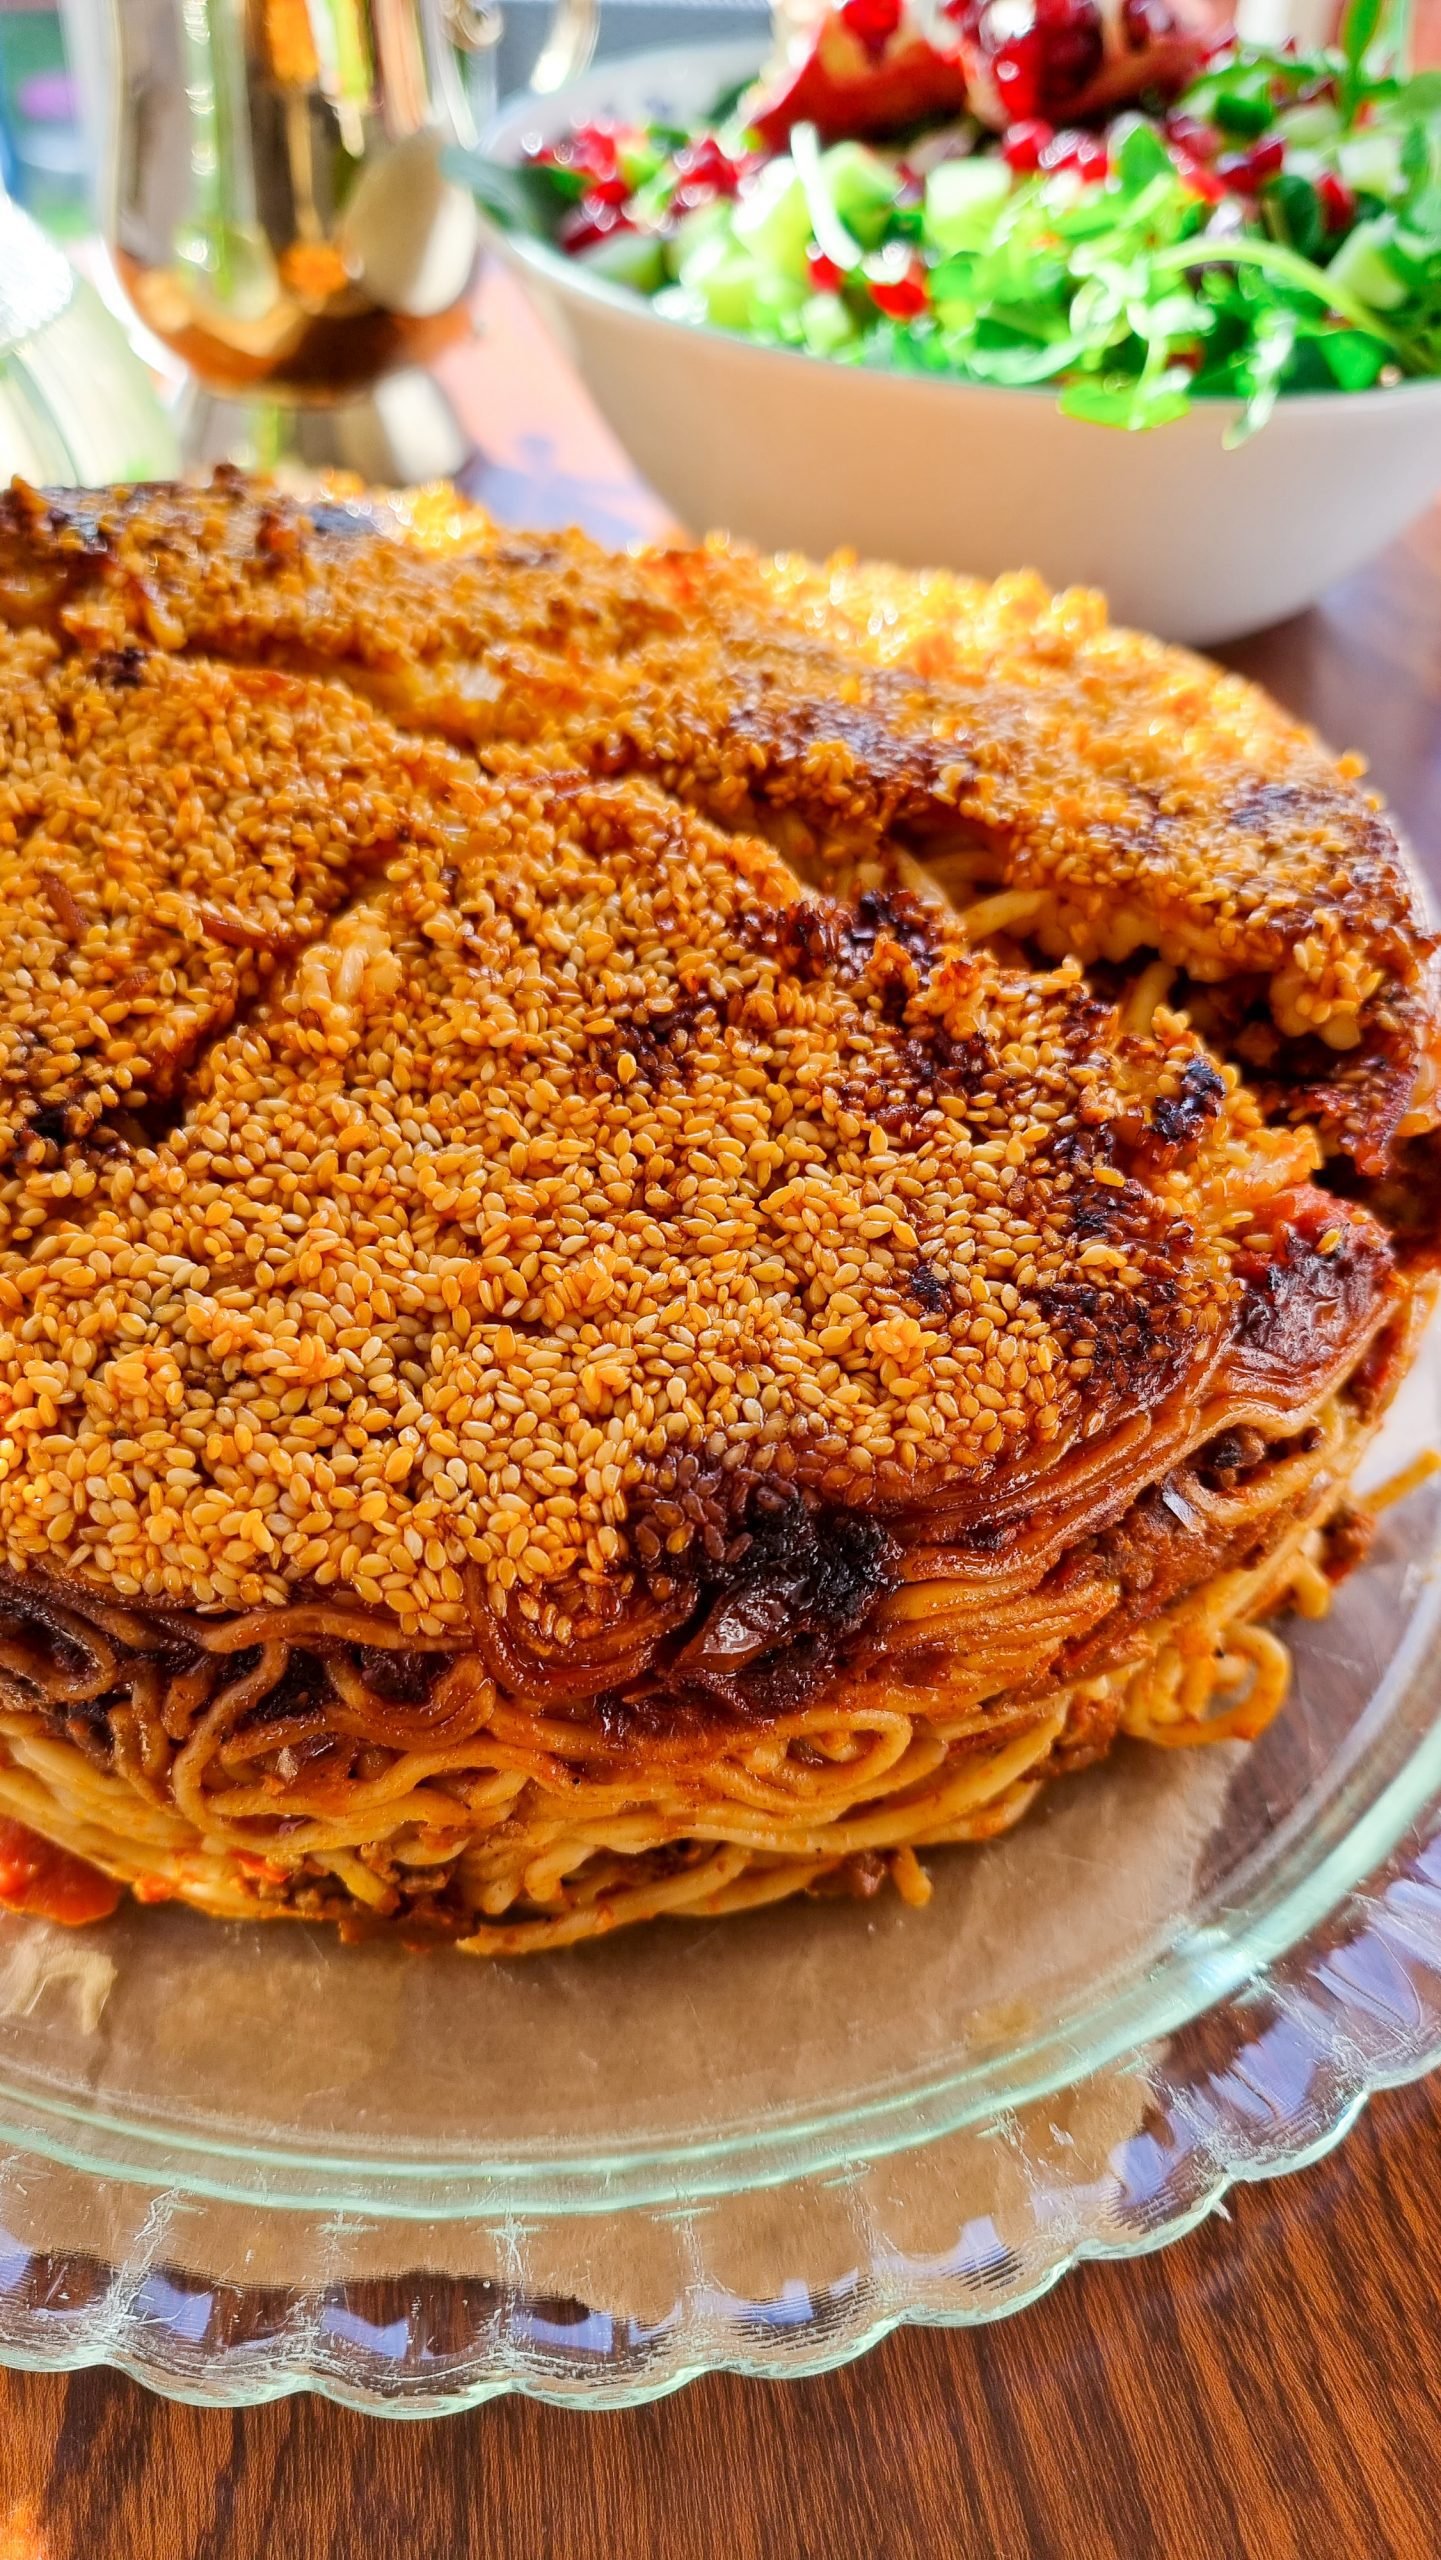 The finished tahdig, a crispy and golden crust, being served with the macaroni